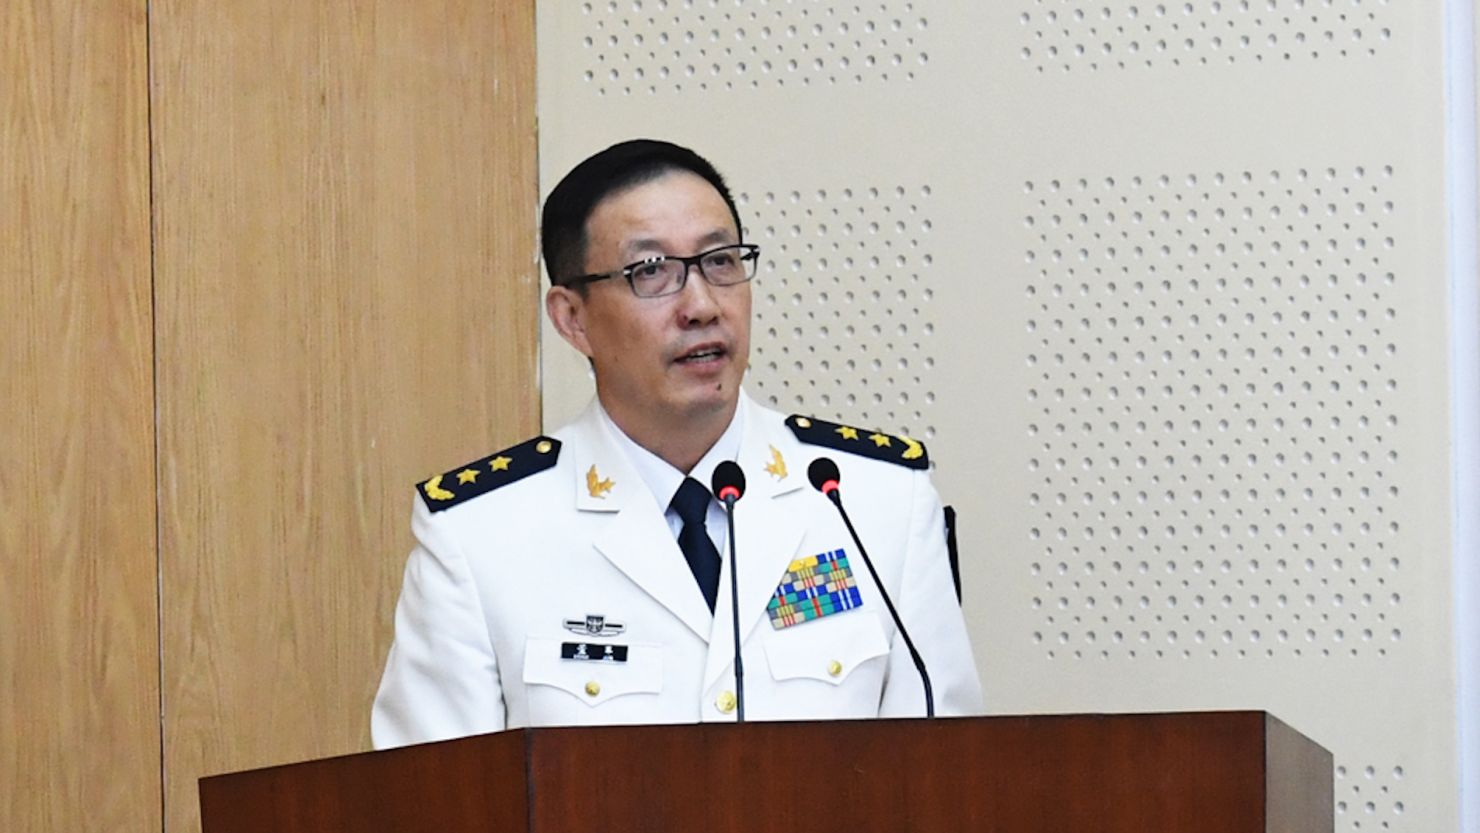 Admiral Dong Jun has been appointed China's defense minister